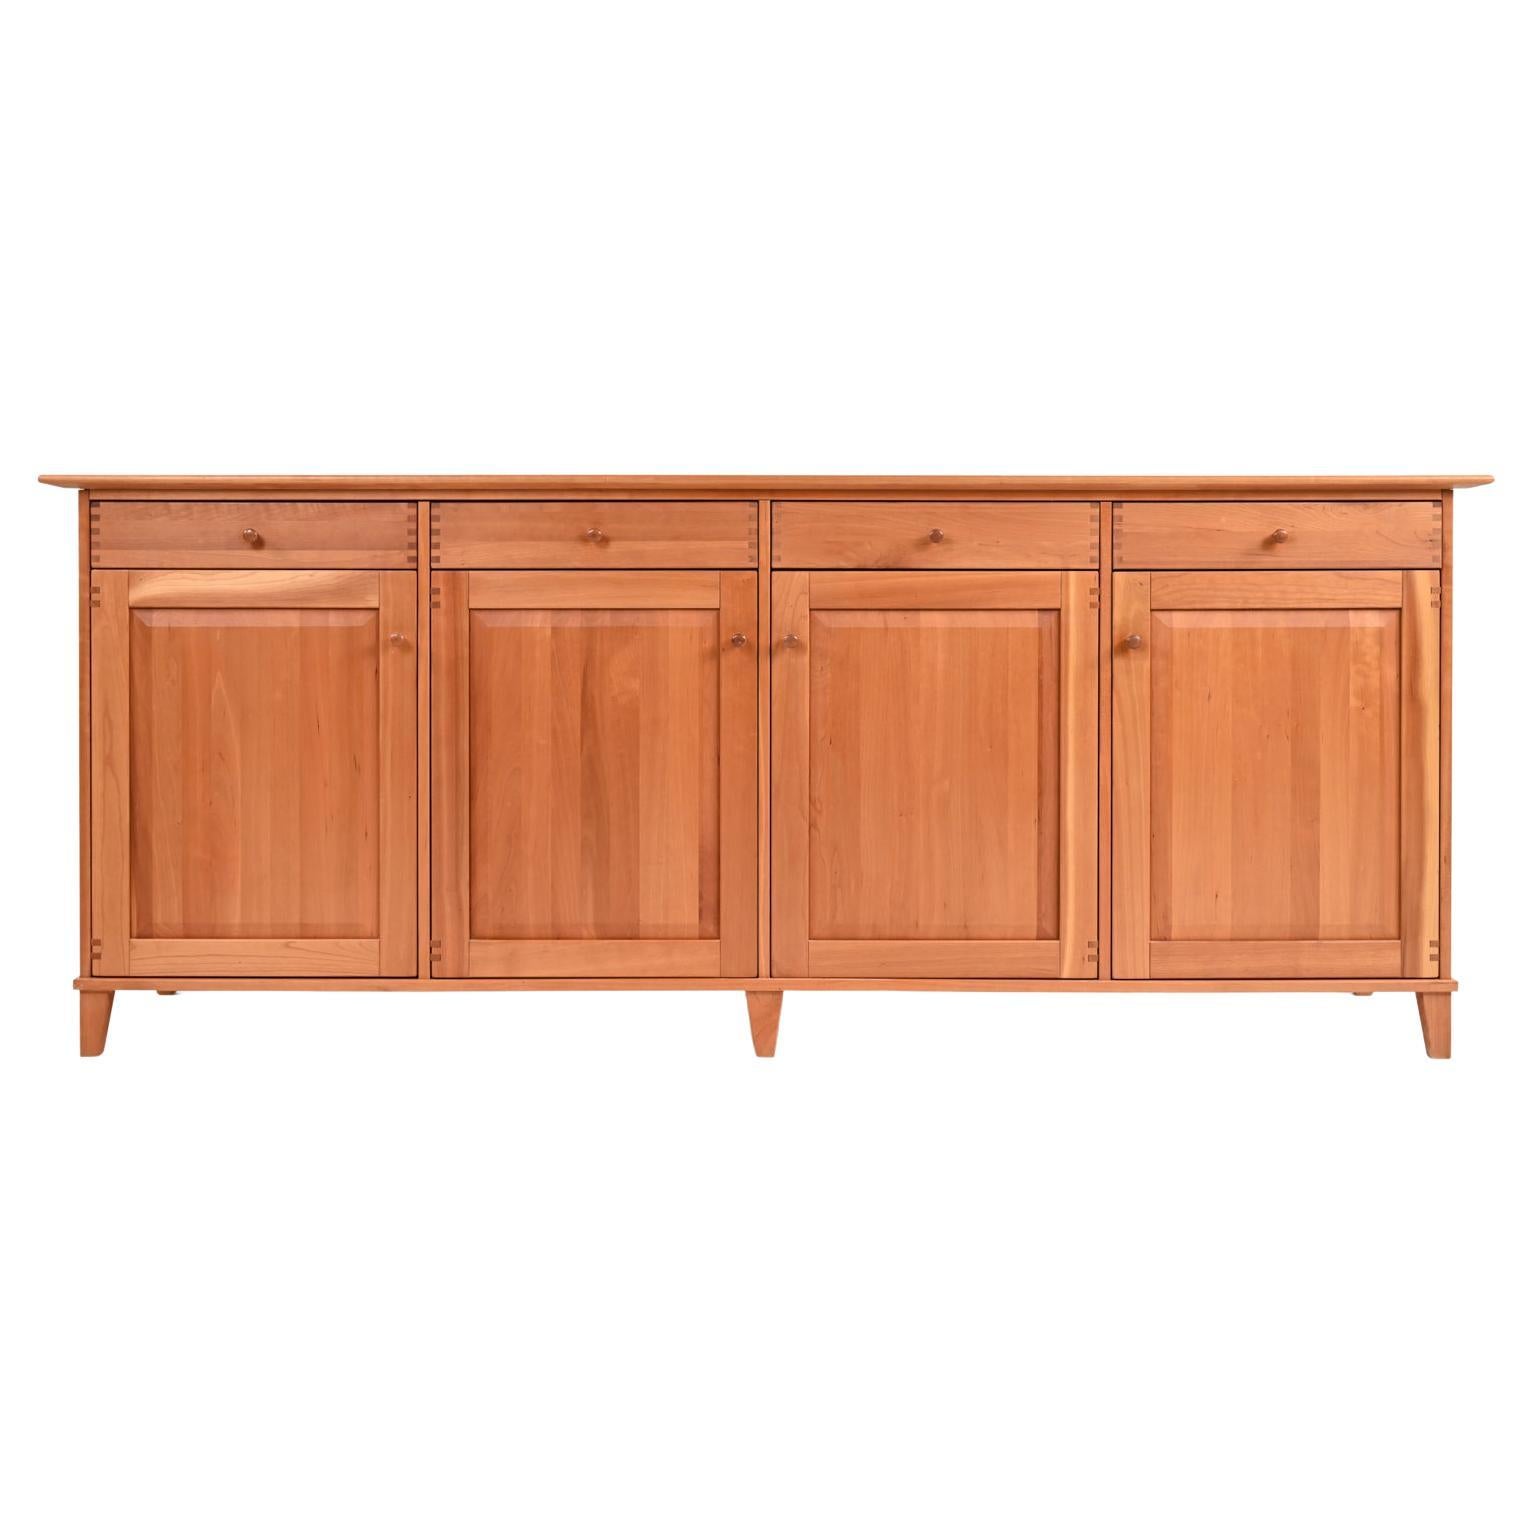 Nissen & Gehl for Naver Collection Cherry Wood Buffet Server Cabinet